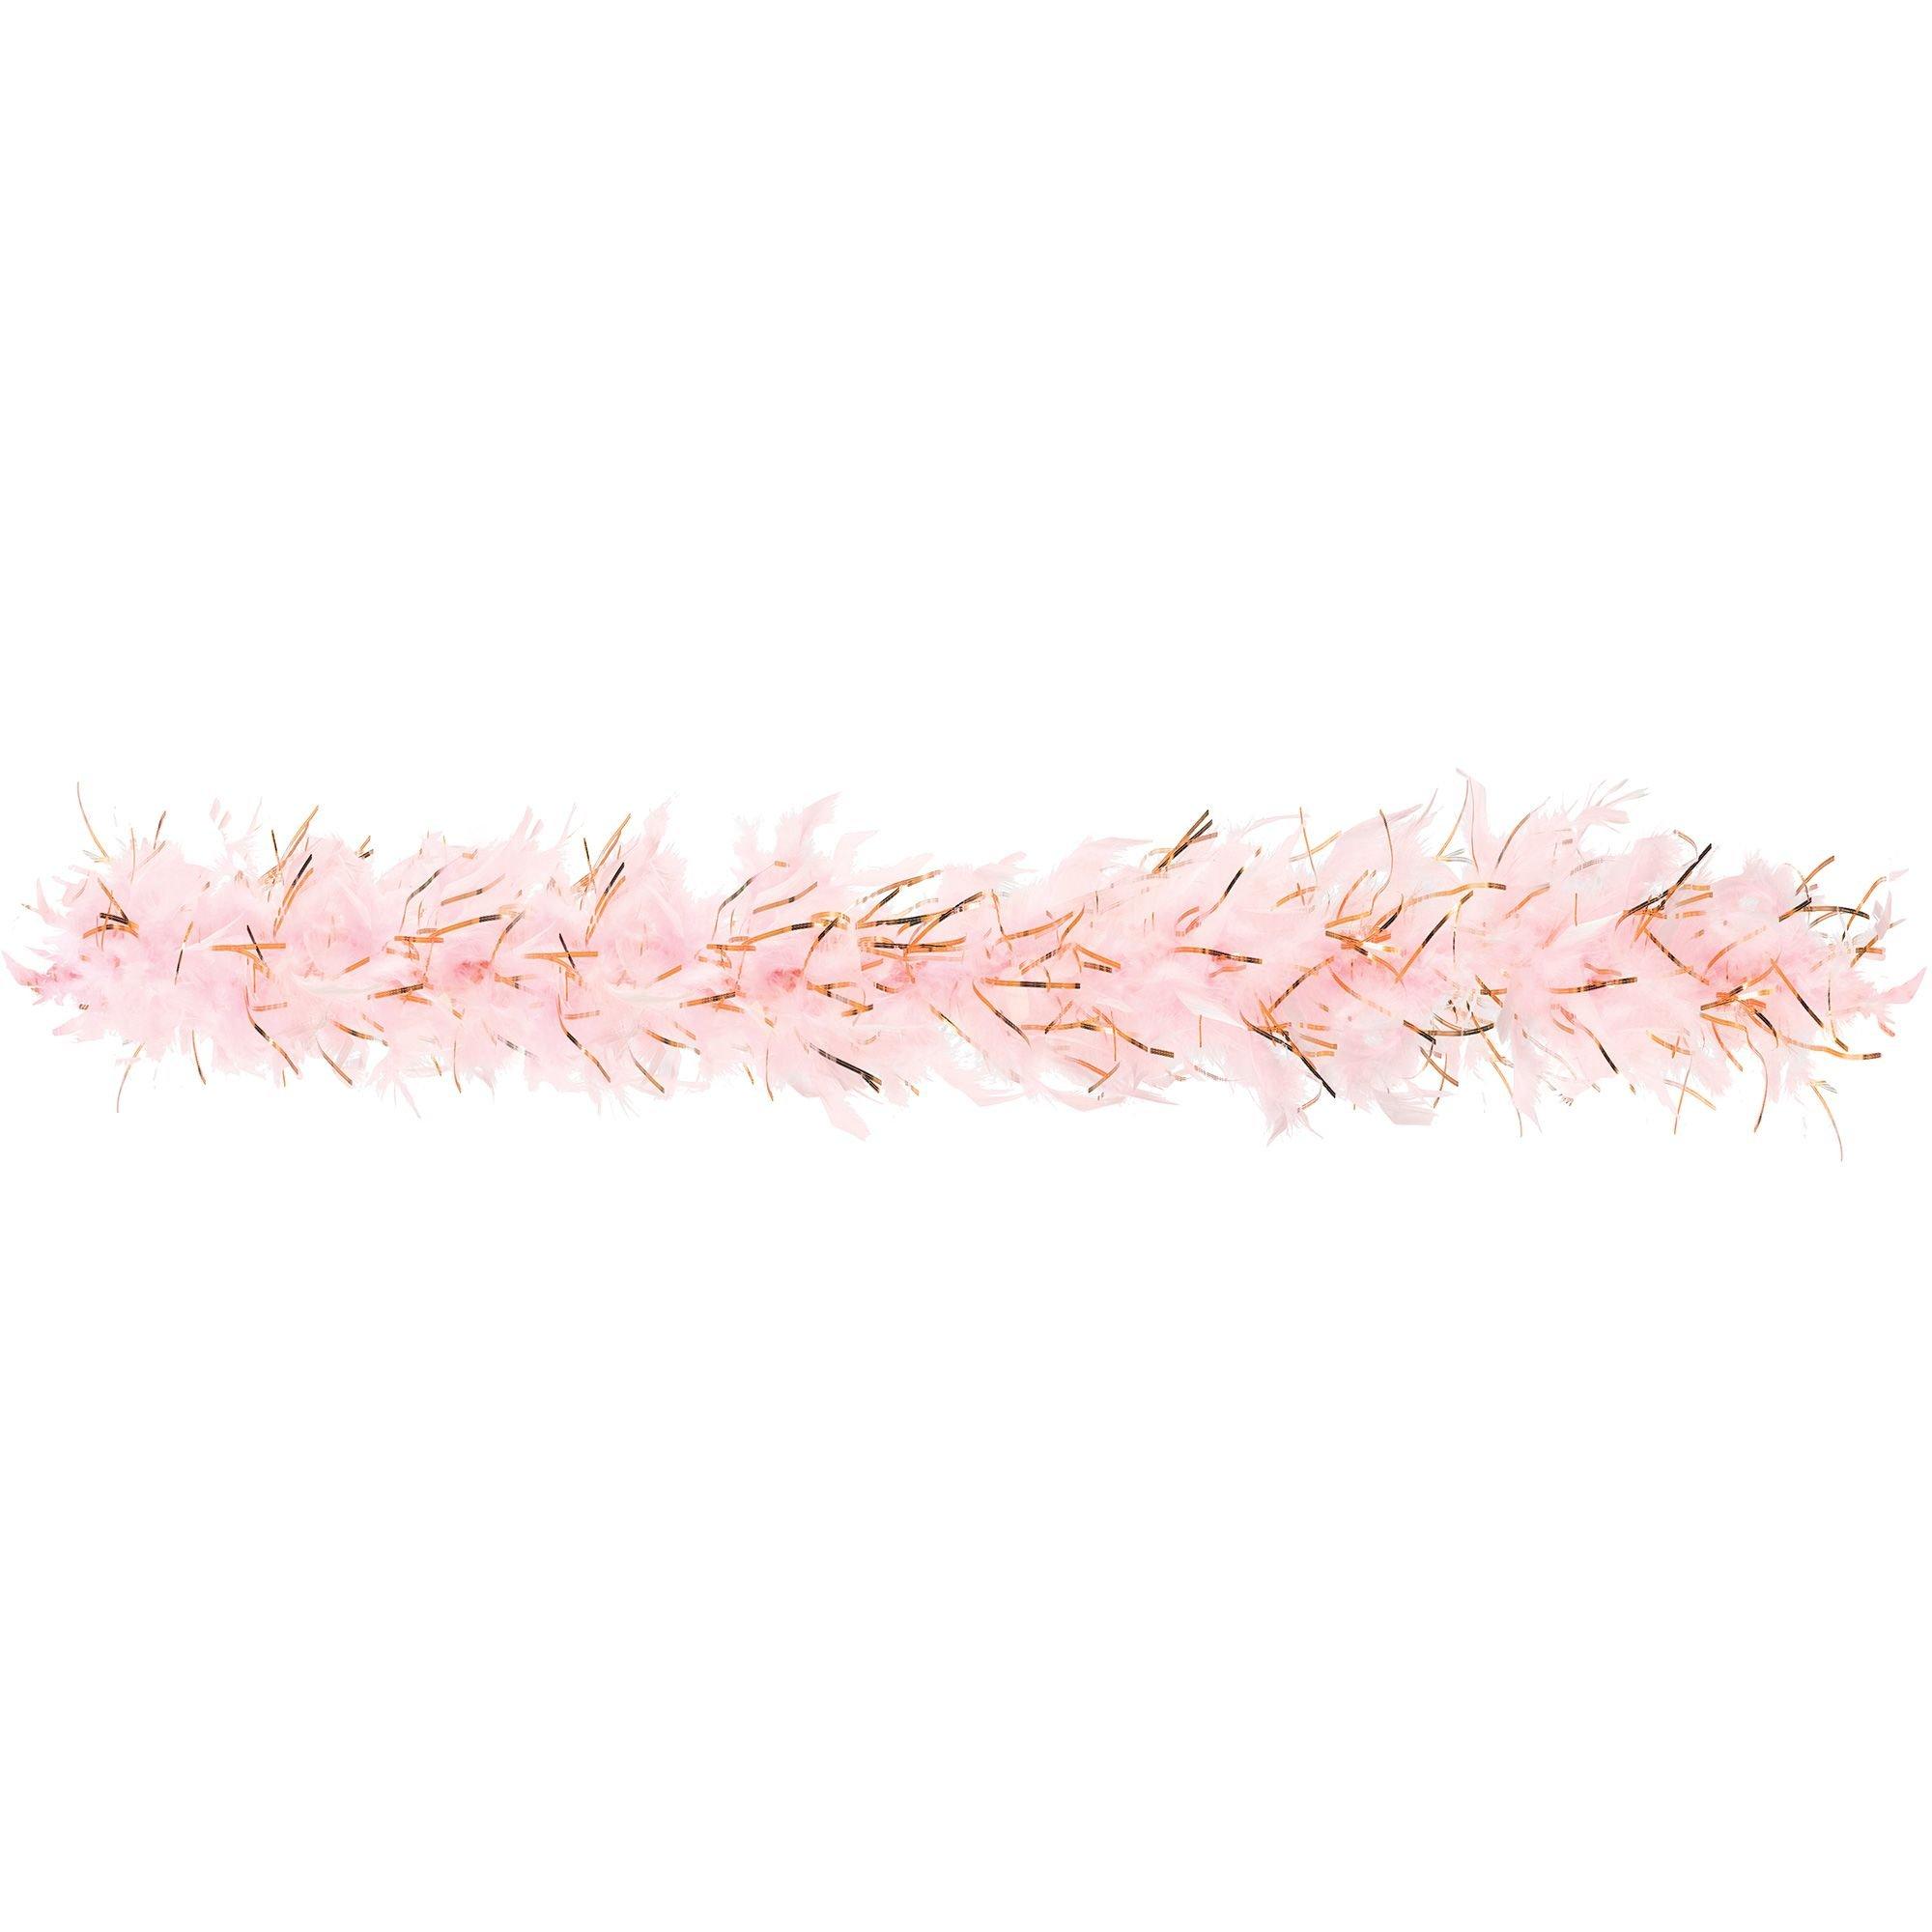  Larryhot Light Pink Feather Boa - 45g 2 Yards Boas for Party  Bulk,Christmas,Wedding Centerpieces,Concert,Costume,Pet and Home  Decoration(45g-Pink) : Clothing, Shoes & Jewelry